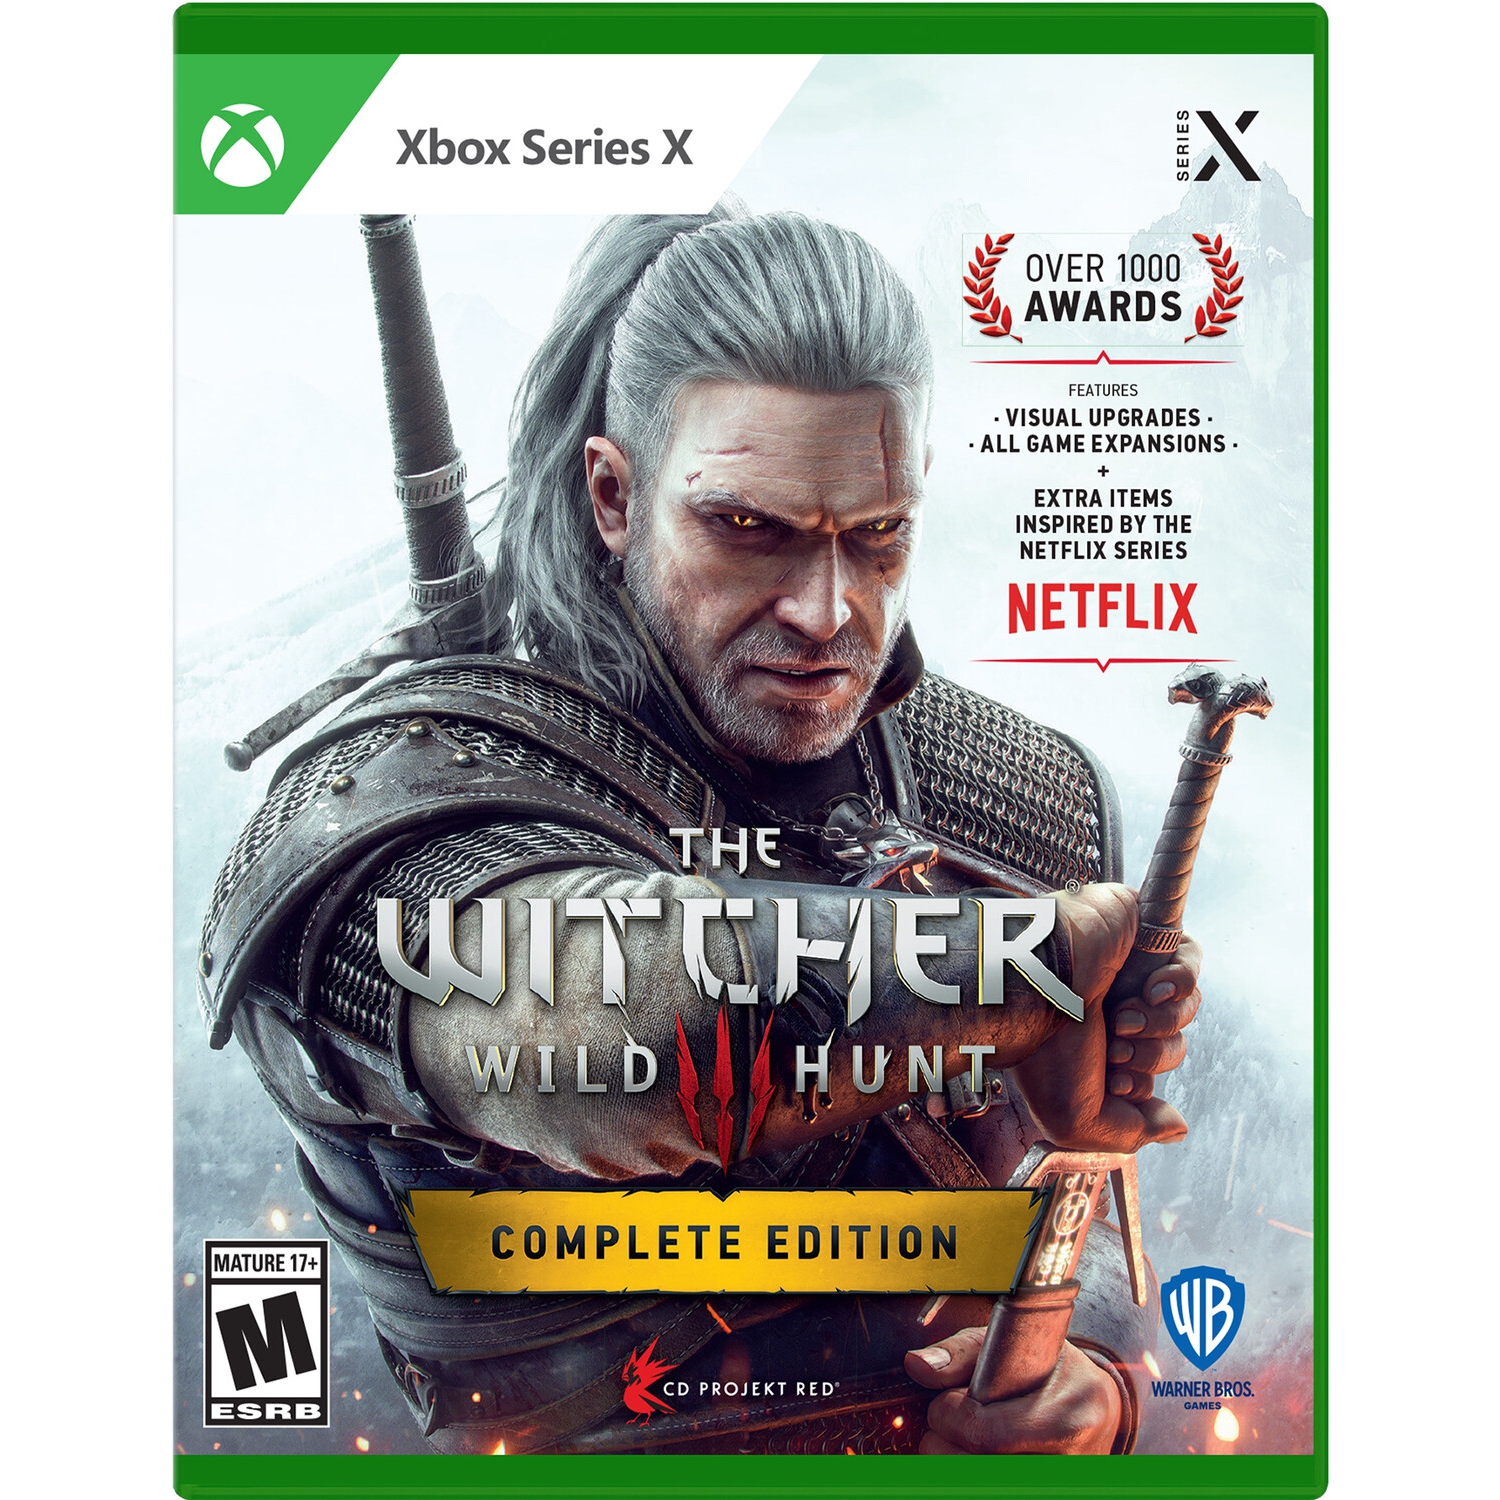 Witcher 3: Wild Hunt Complete Edition for Xbox Series X S [VIDEOGAMES]